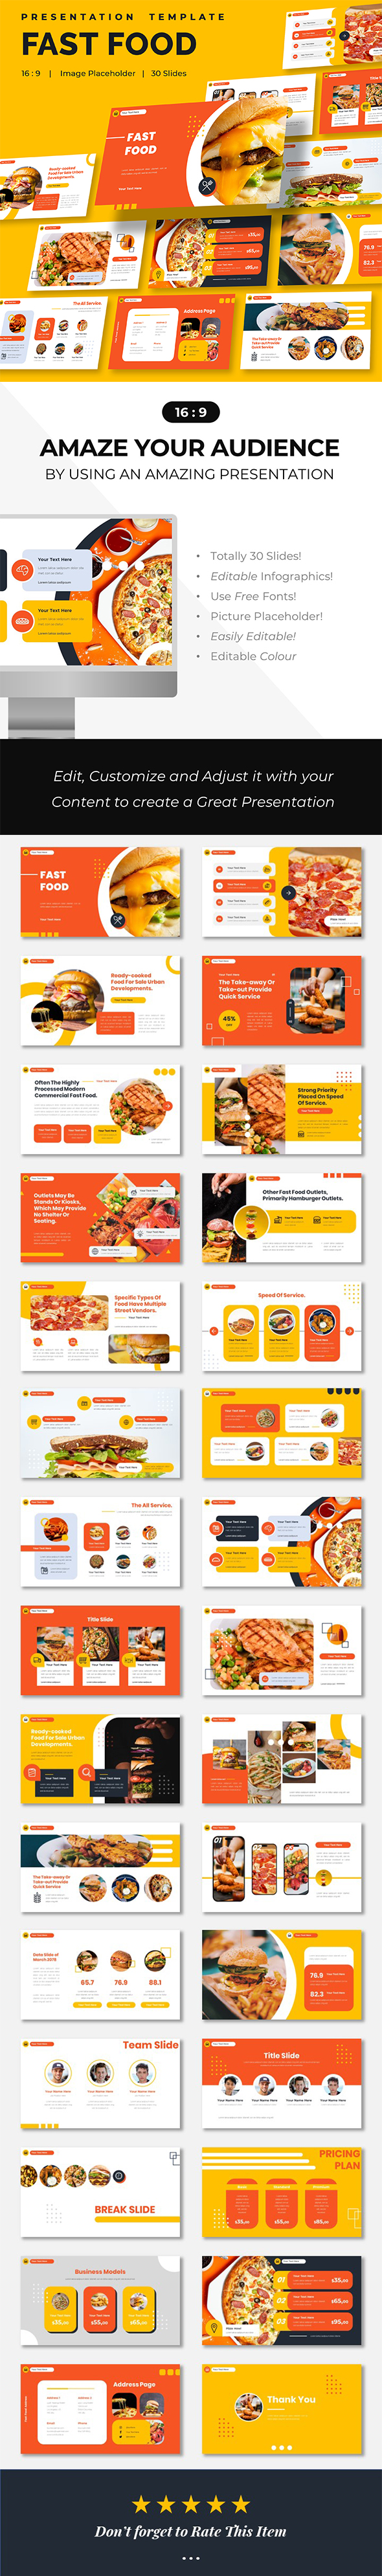 Fast Food - Service Culinary Business Presentation Powerpoint Template